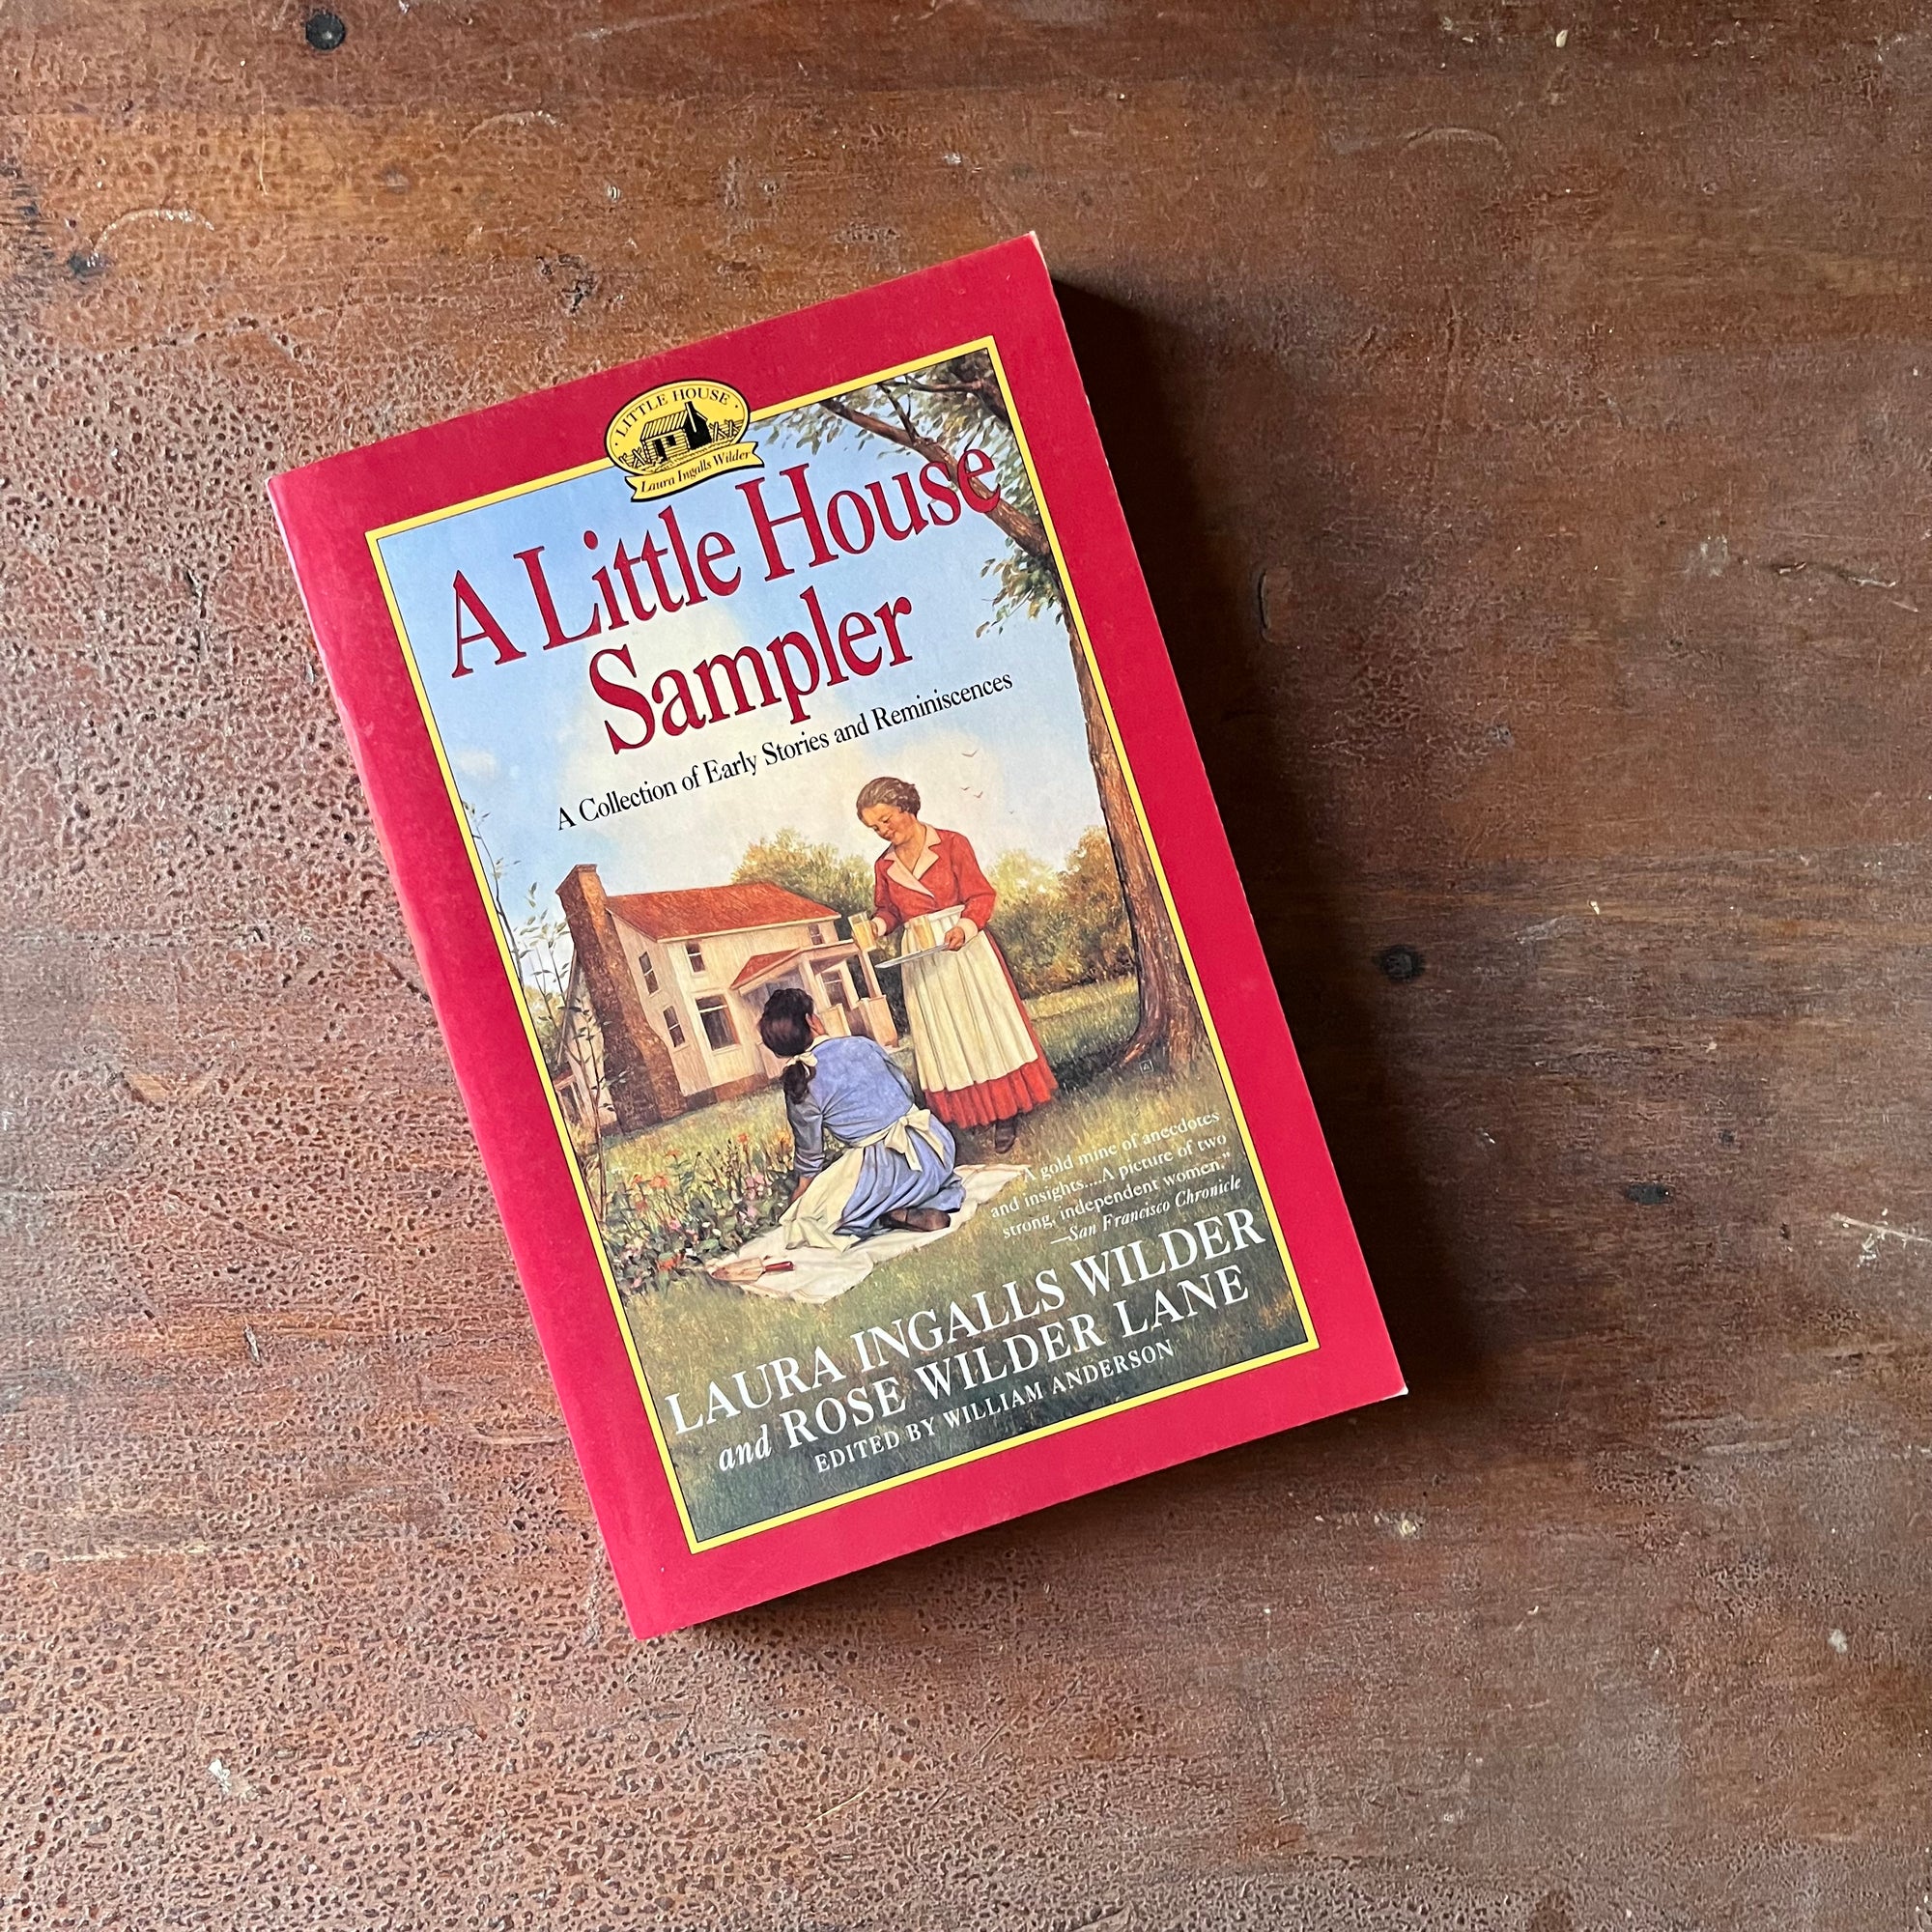 A Little House Sampler A Collection of Early Stories & Reminiscences by Laura Ingalls Wilder & Rose Wilder Lane - view of the front cover